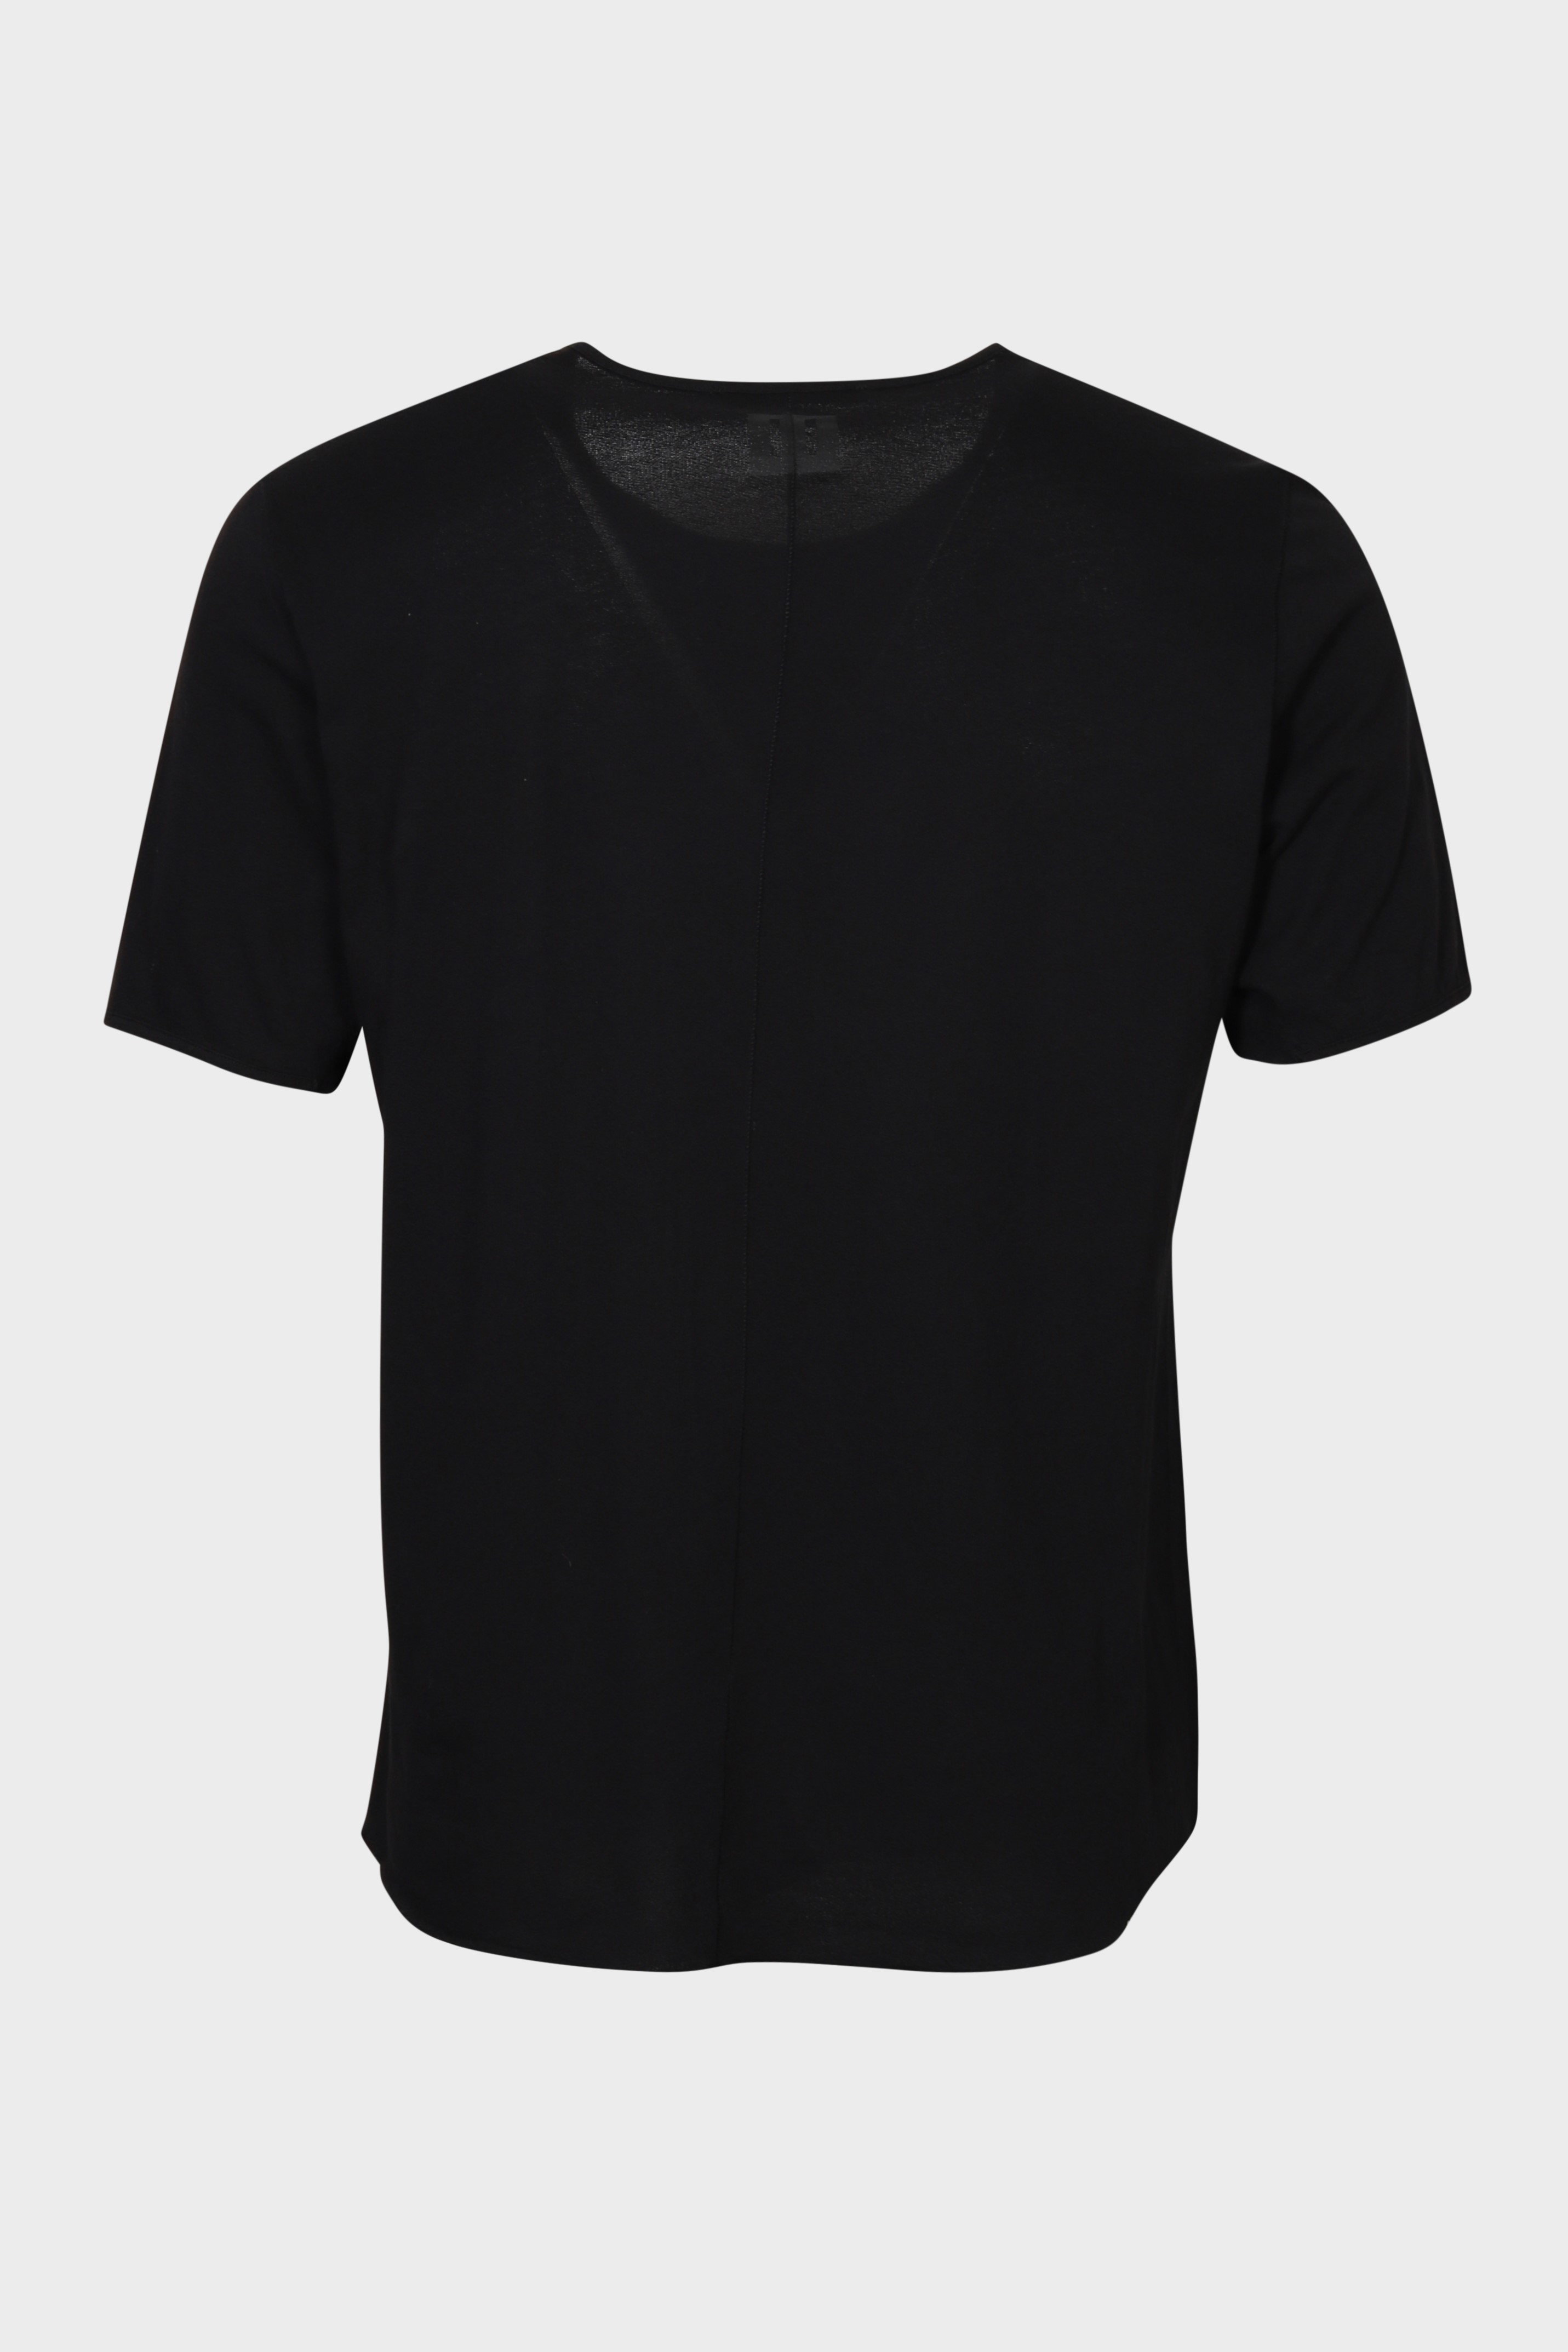 HANNES ROETHER T-Shirt in Black M